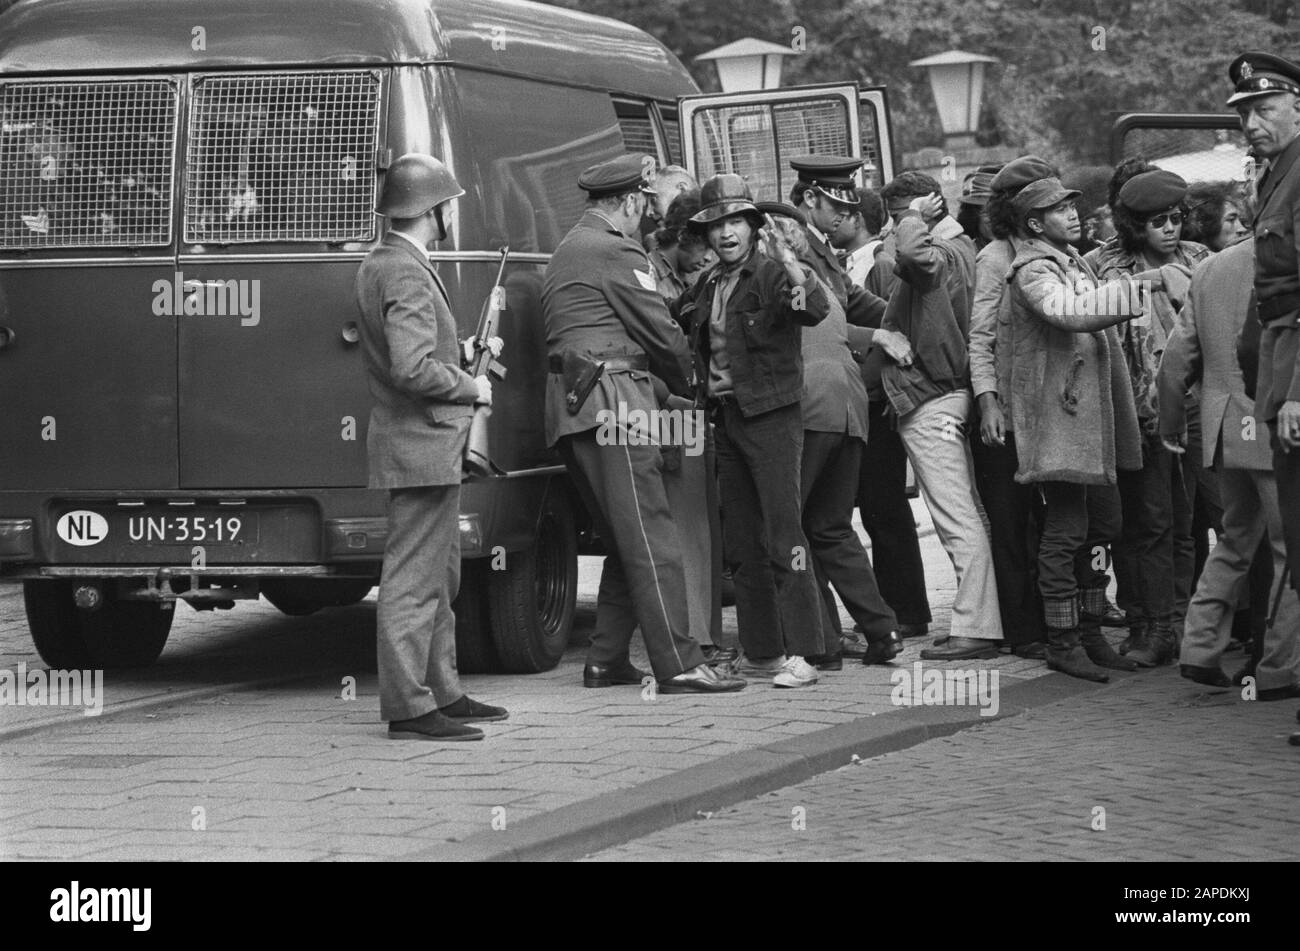 Ambonese occupying home Indonesian Ambassador, Wassenaar; Ambonese are searched before entering police cars Date: 31 August 1970 Location: Wassenaar, Zuid-Holland Keywords: Ambonese, police cars Stock Photo